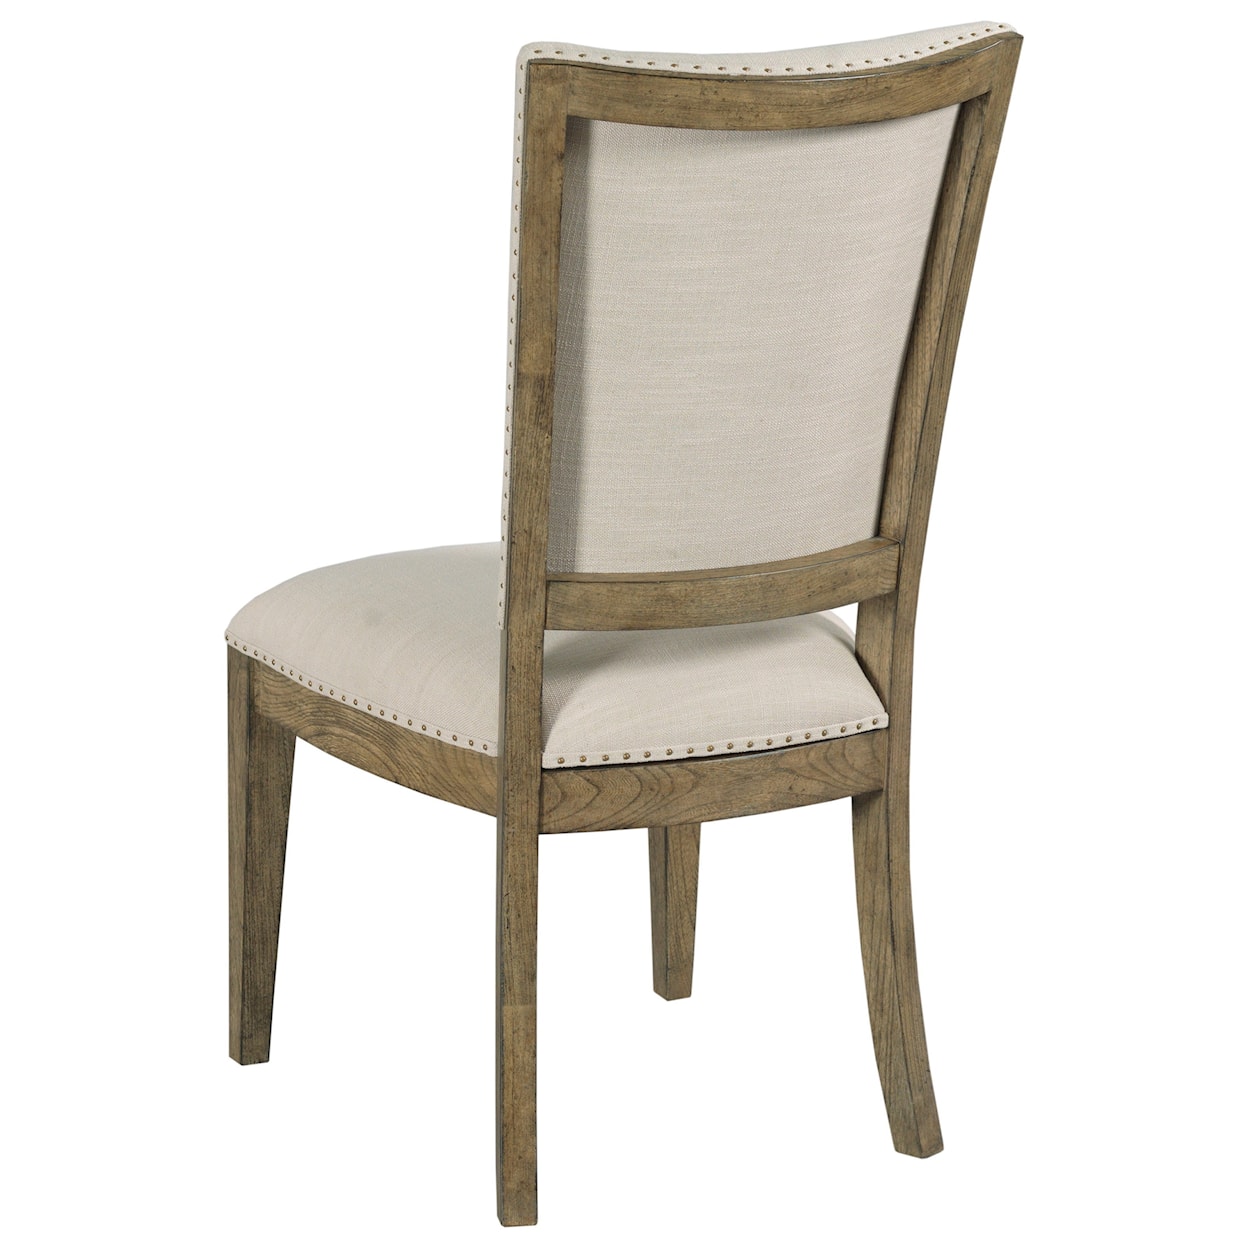 Kincaid Furniture Plank Road Howell Side Chair                           